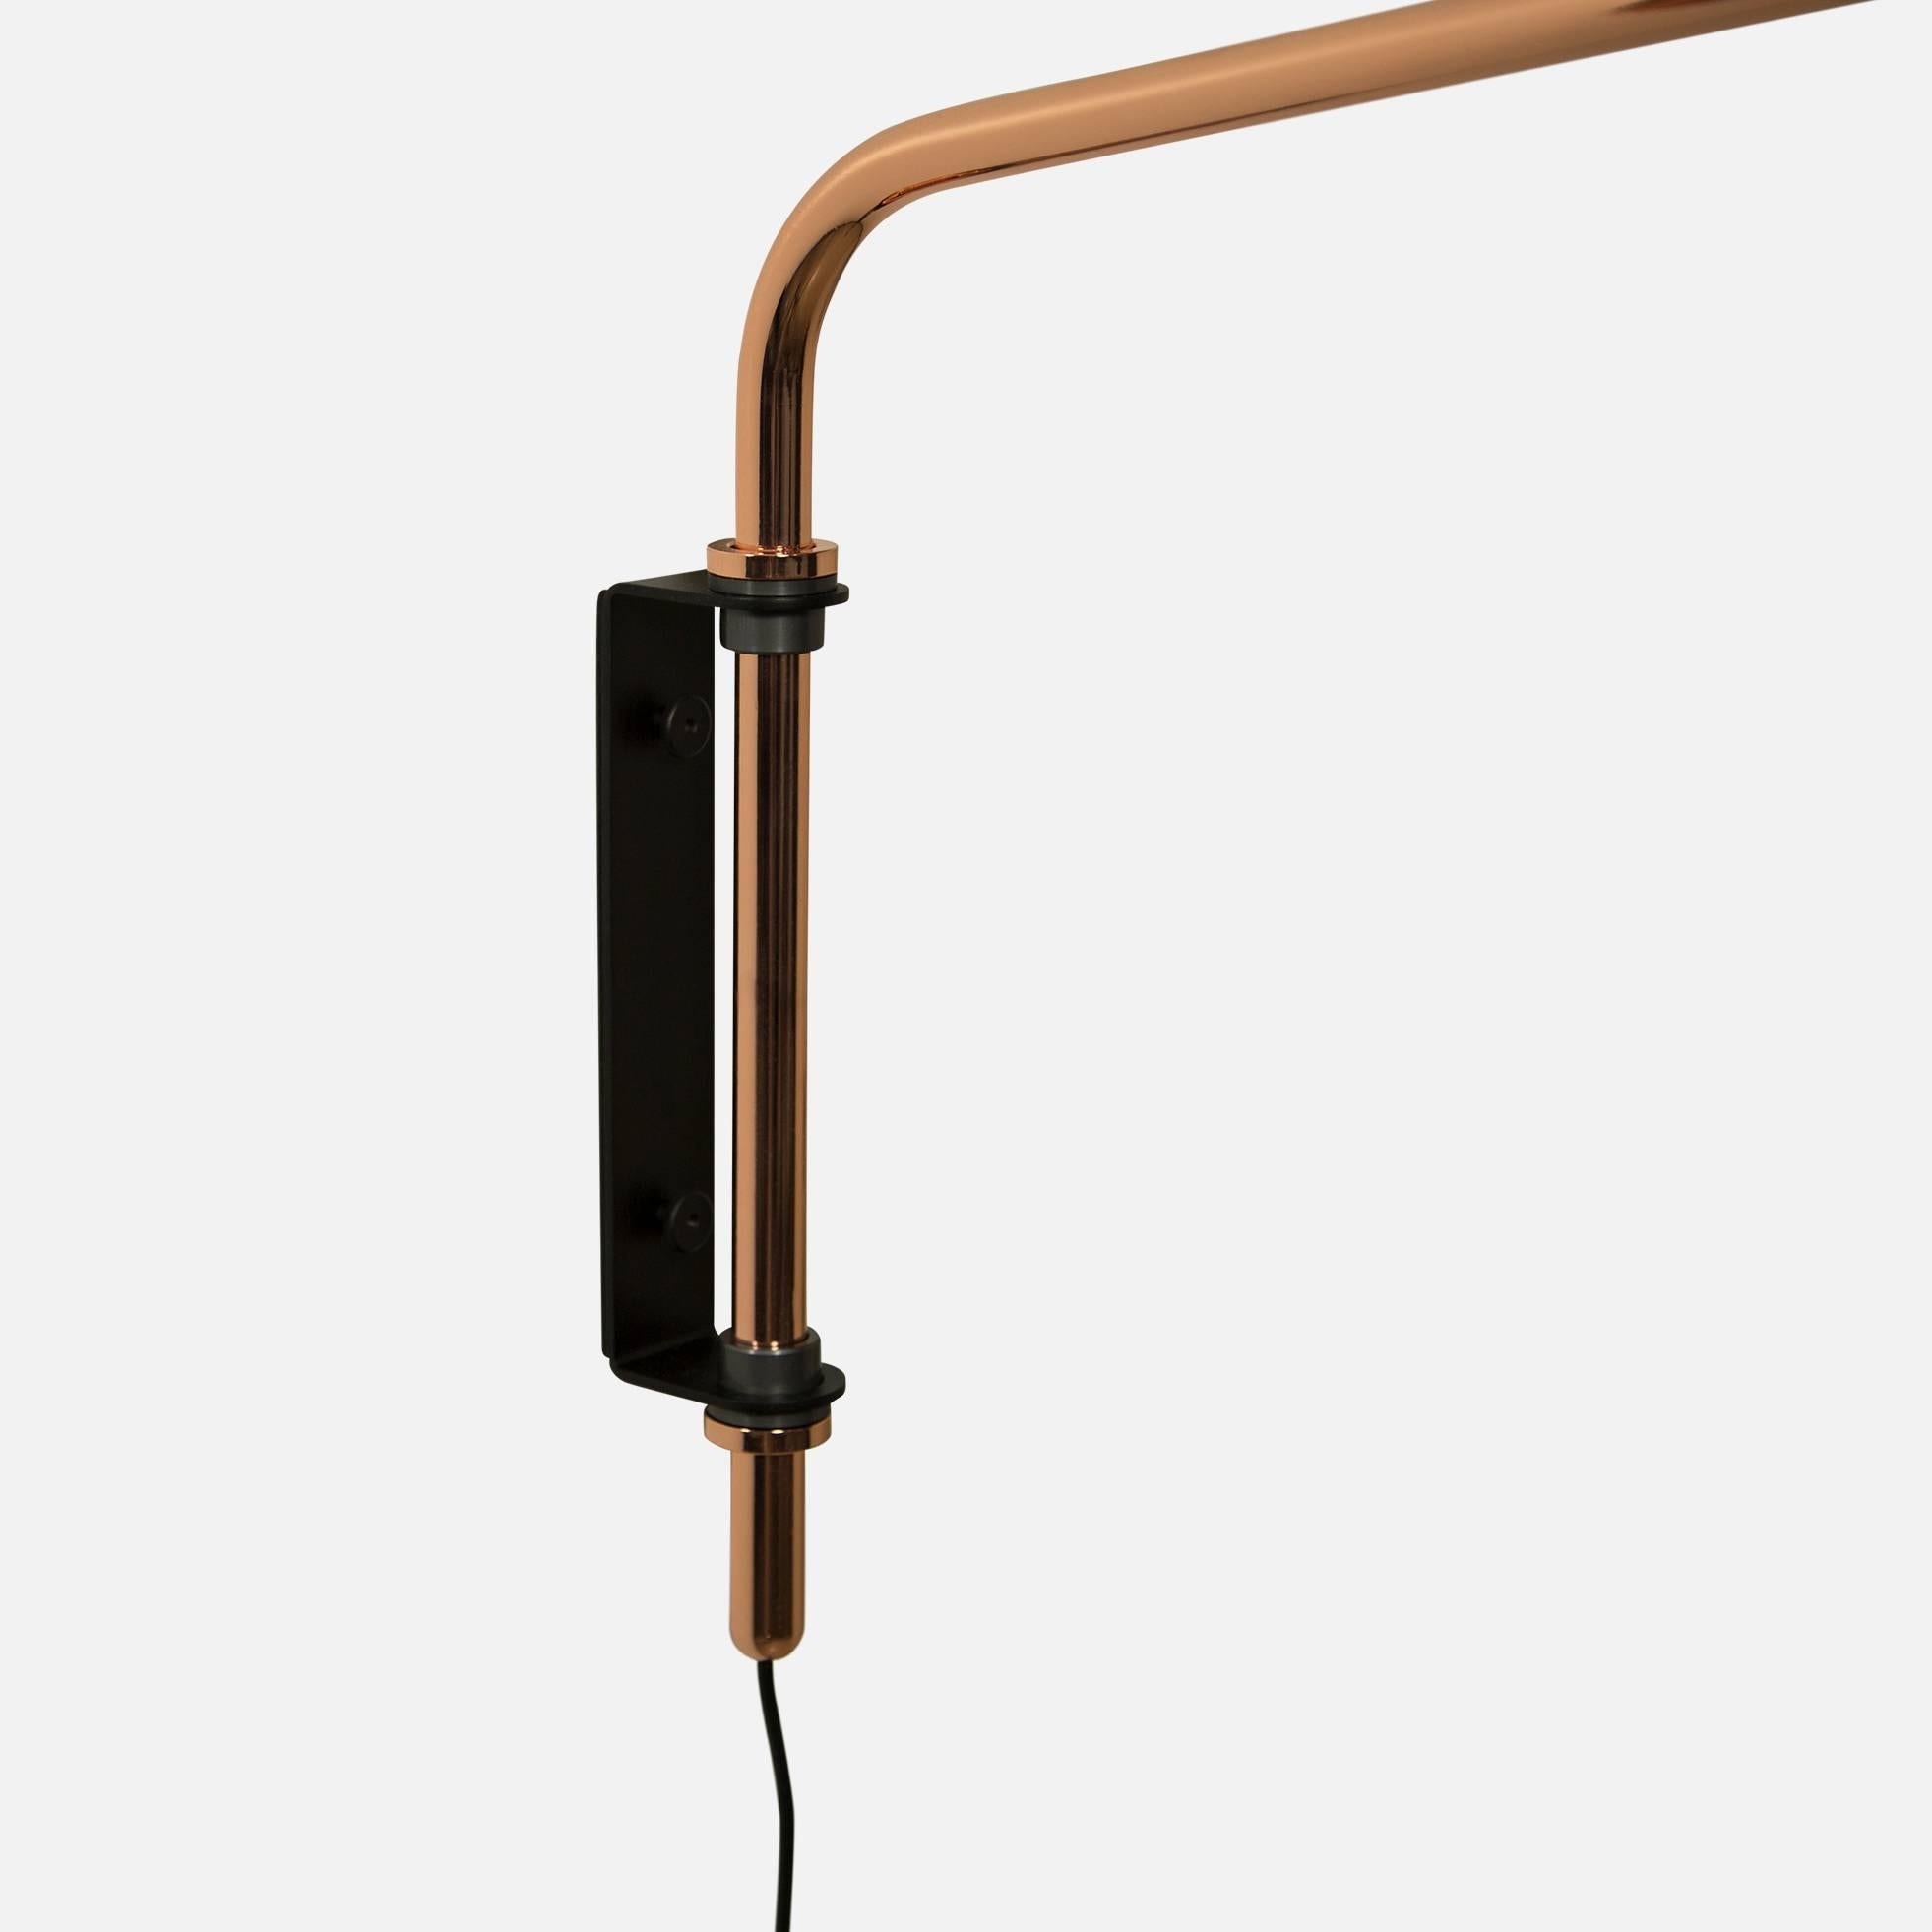 American Signal Swing Arm Sconce in Copper, Long, from Souda, Made to Order For Sale